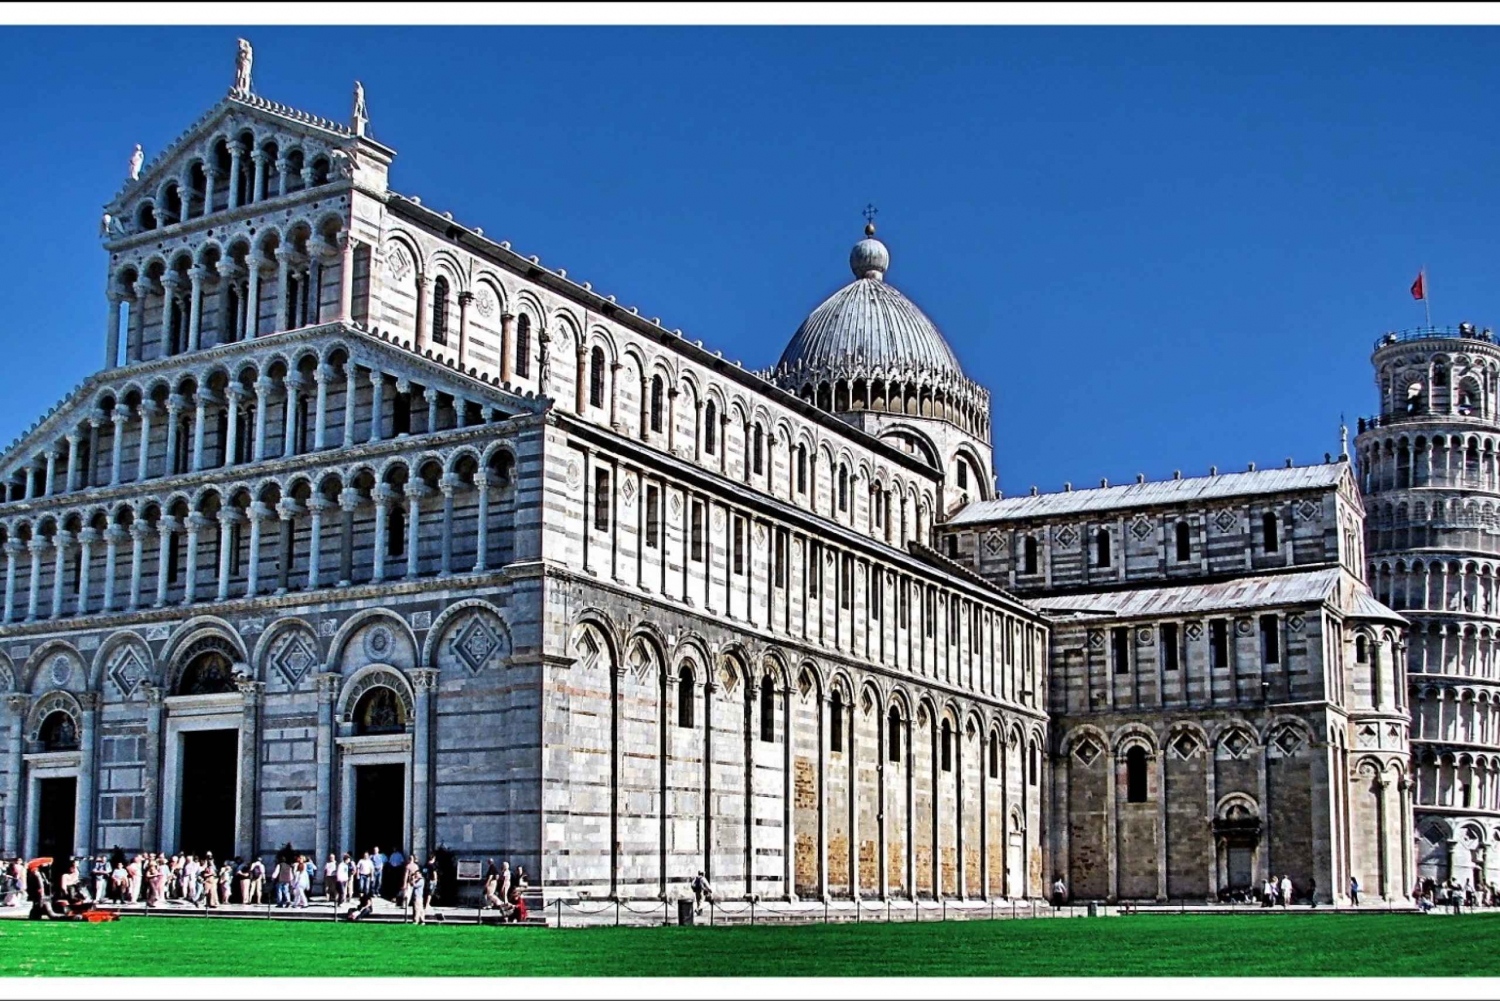 From Rome: Florence, Accademia Gallery, & Pisa Private Tour